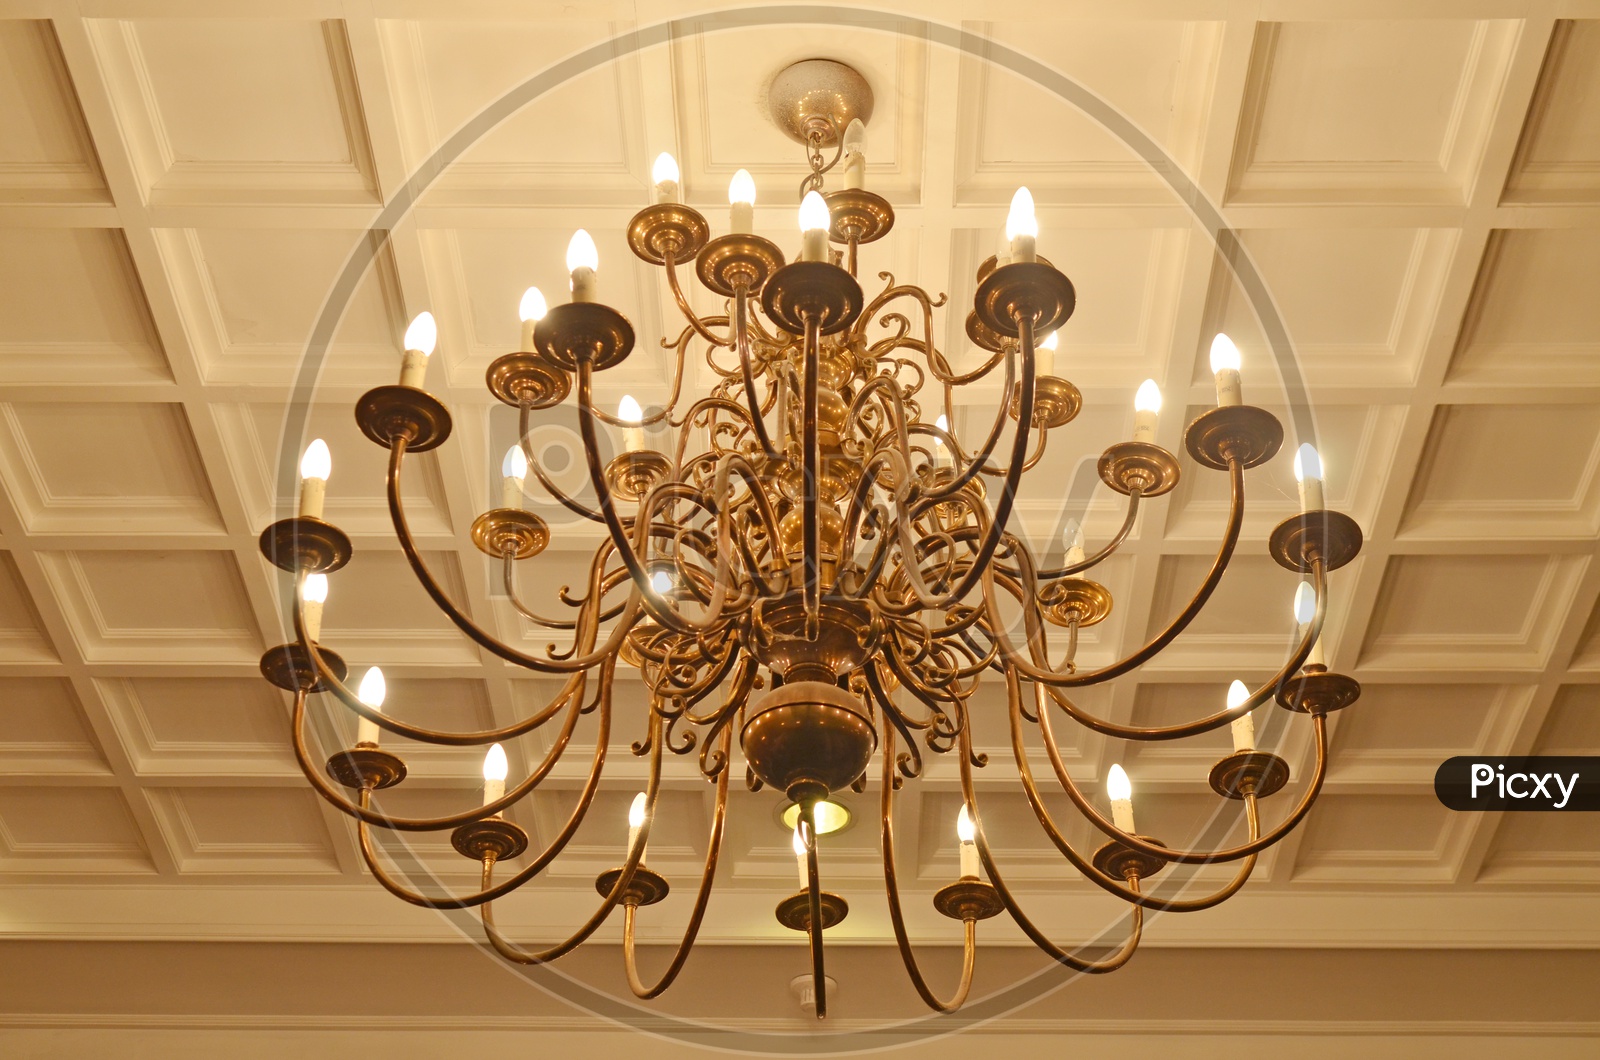 A Simple chandelier in Thai Hotel